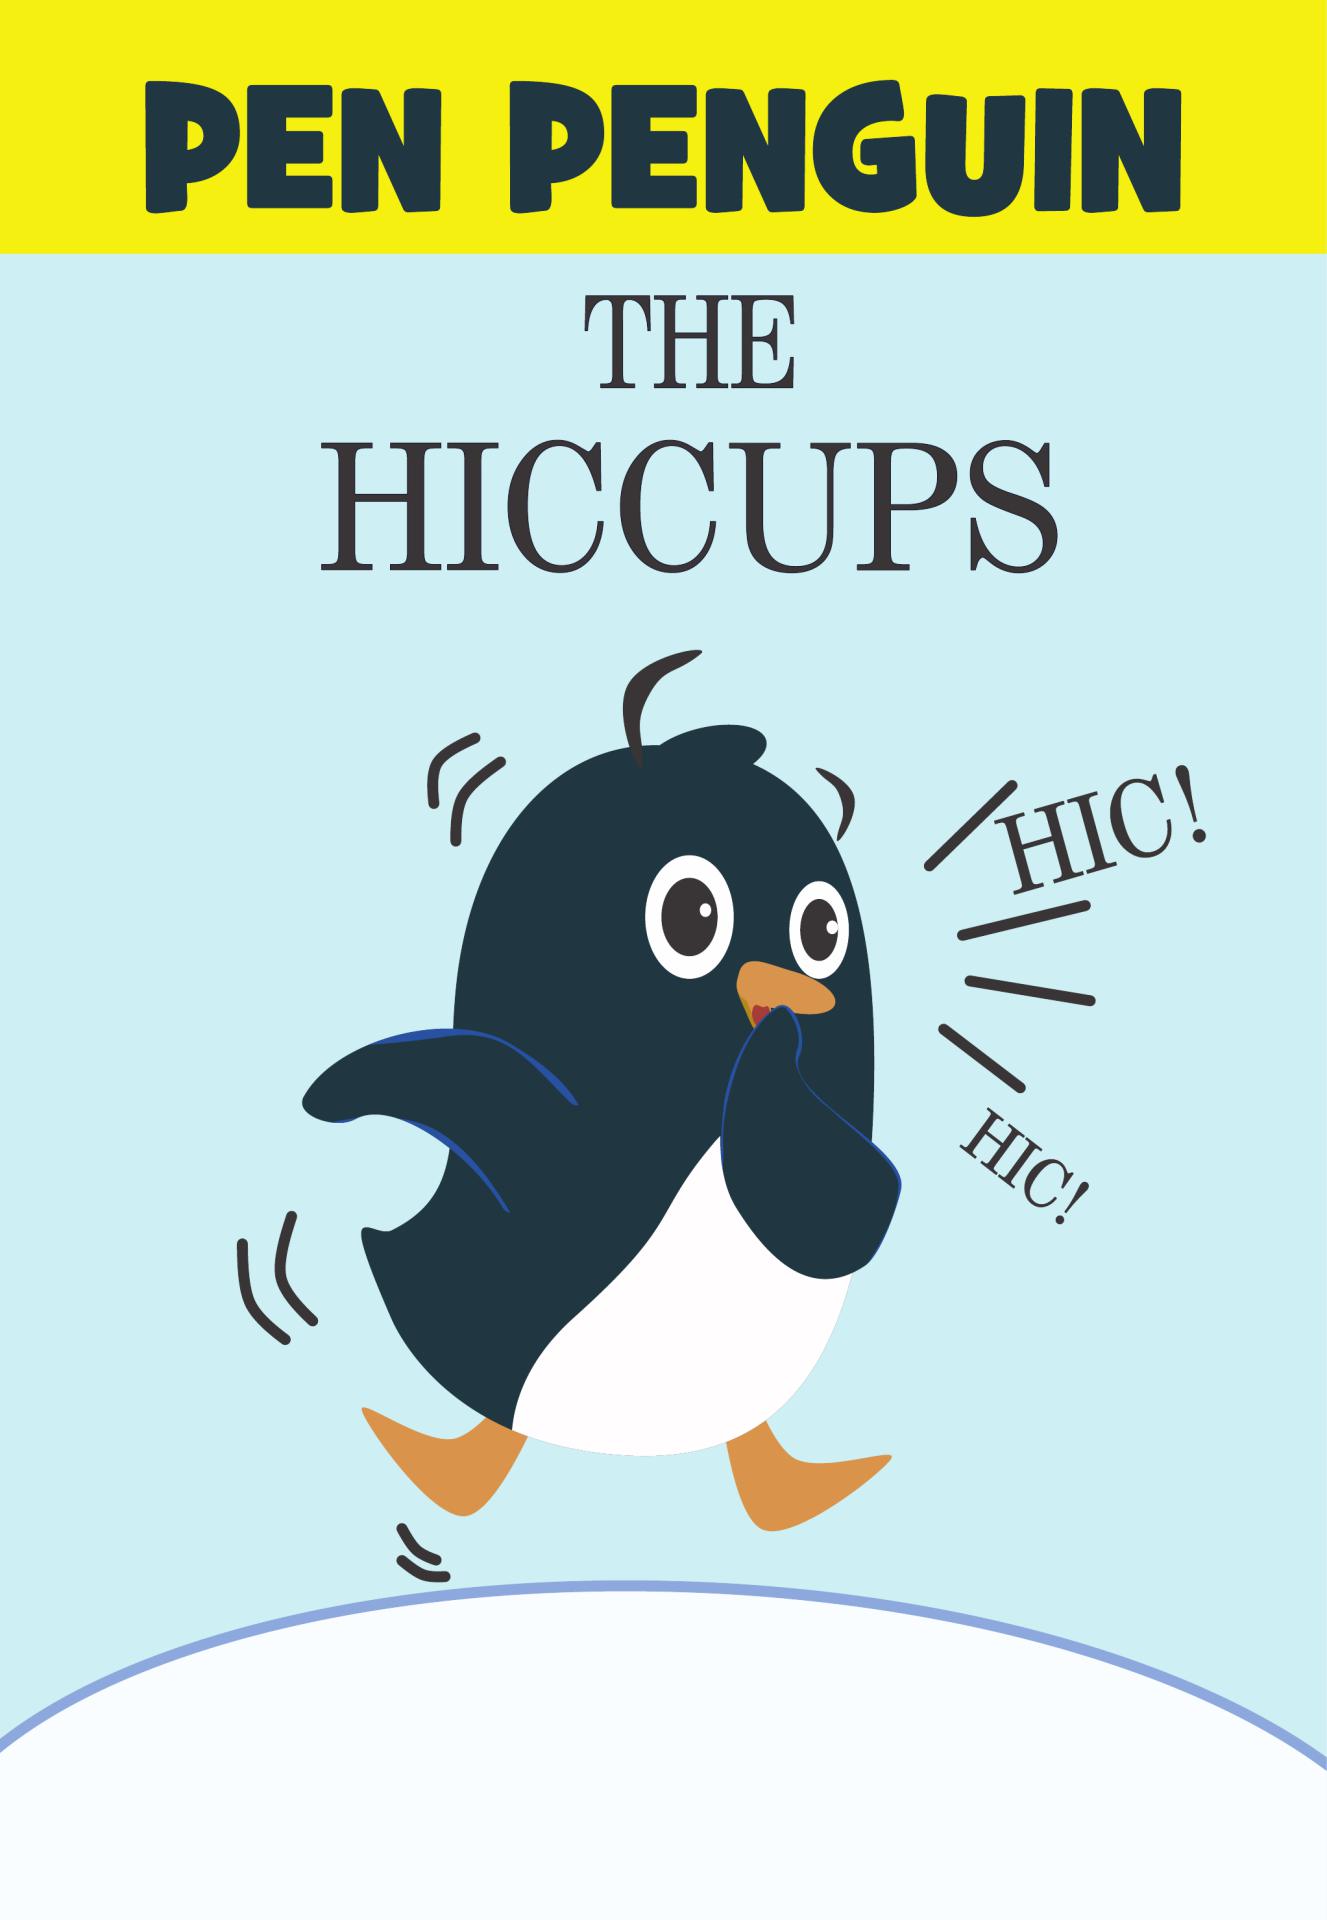 FREE: The Hiccups by Ryan Huss